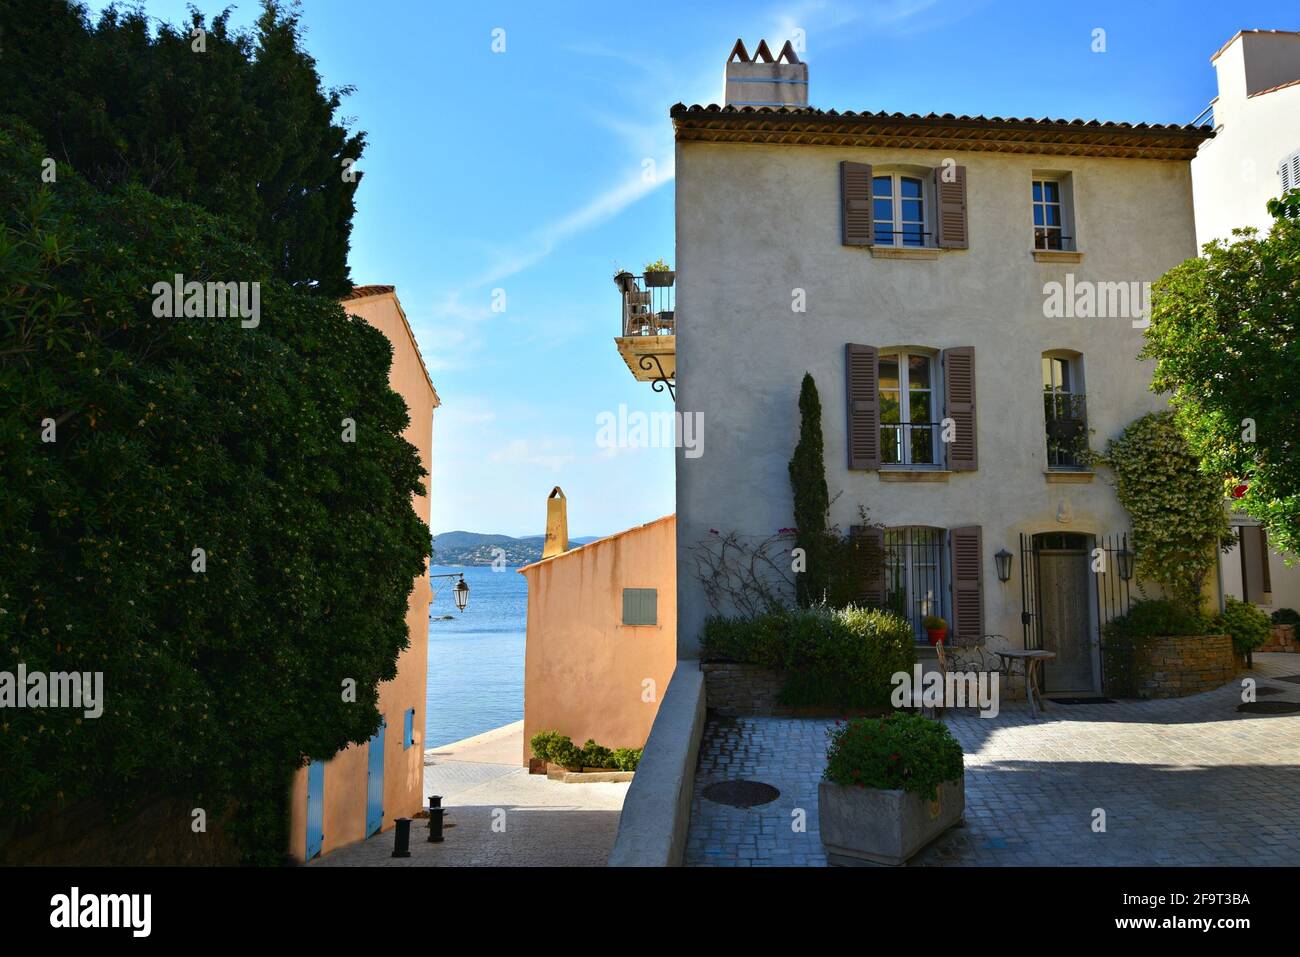 Typical Provençal style house at La Ponche Beach of Saint-Tropez in French Riviera France. Stock Photo